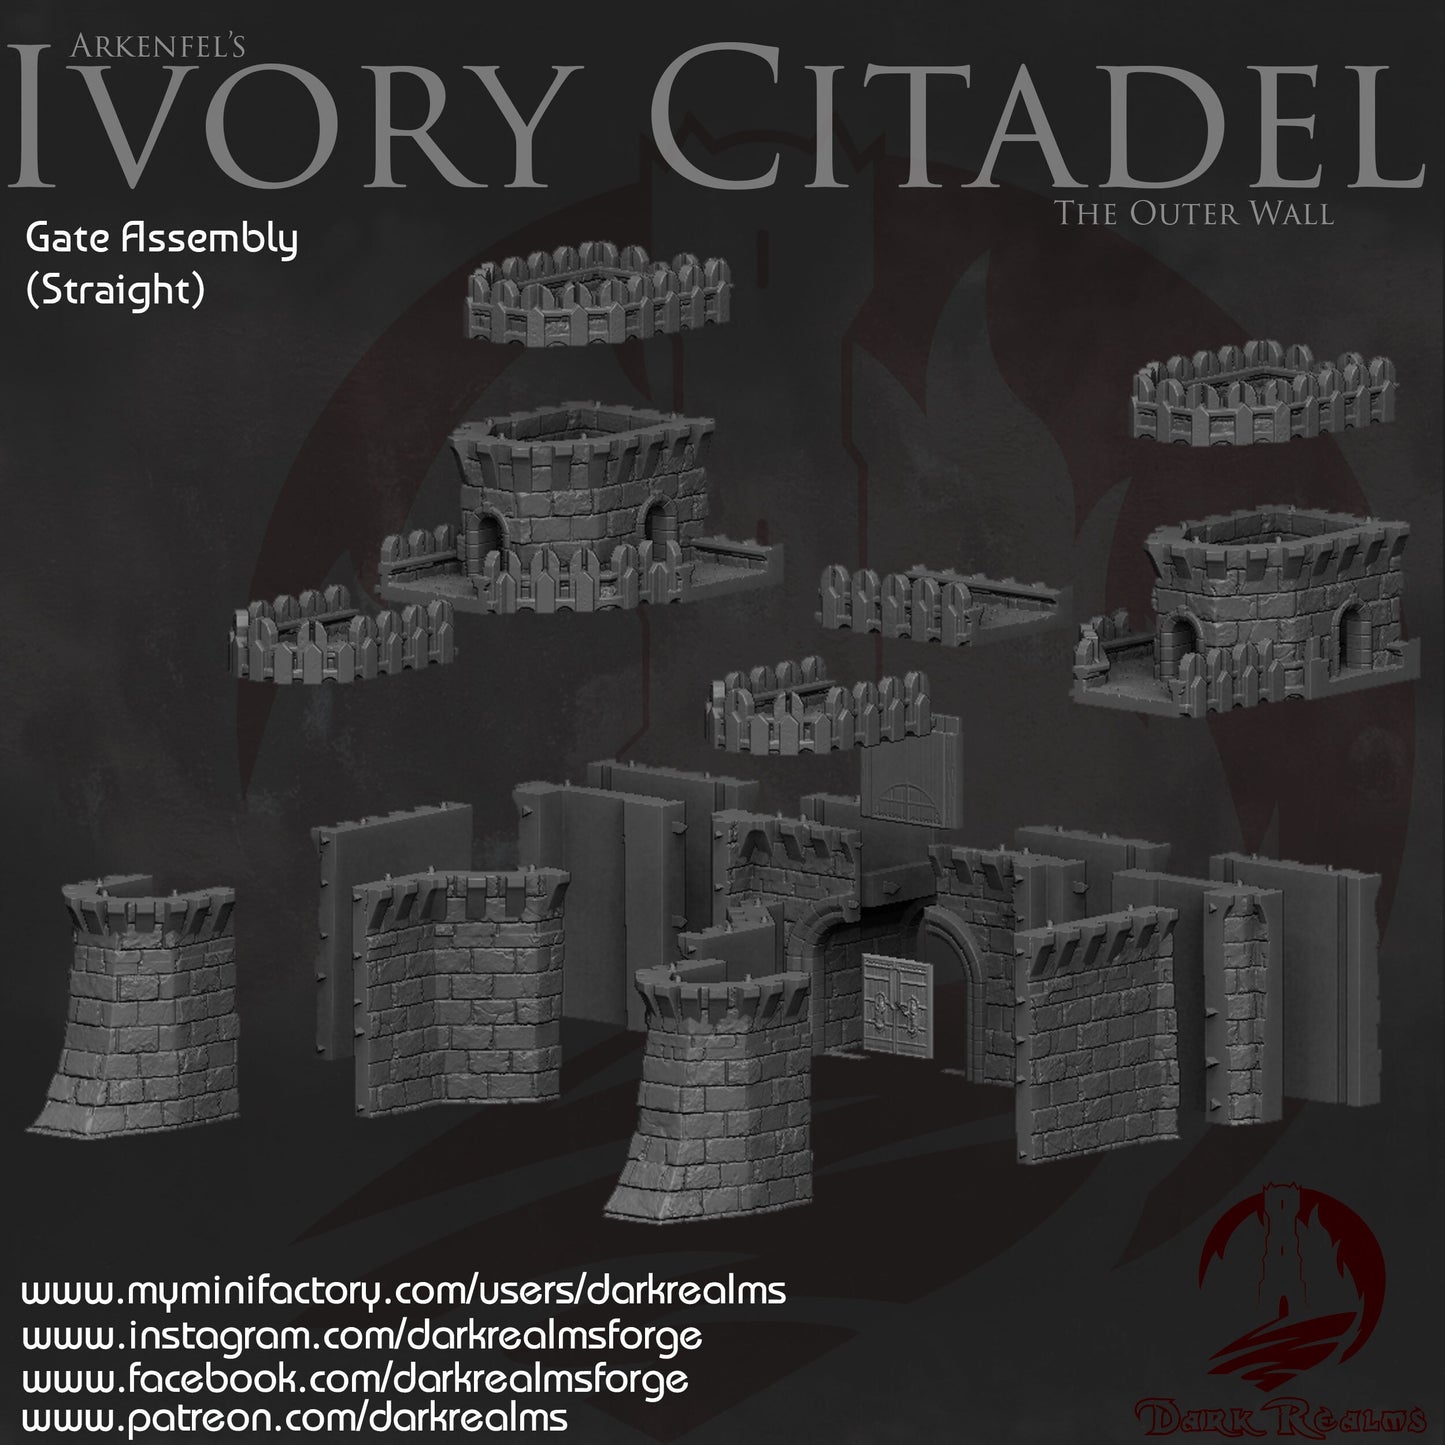 Ruins, Arkenfel, medieval, Dungeons and Dragons, warhammer, City, Osgiliath, lotr, Gondor, Lord of the rings, house 2,city building, Minas Tirith, citadel, walls, wall system, outer wall, arkenfel wall, gondor wall, minas tirith wall, wall set